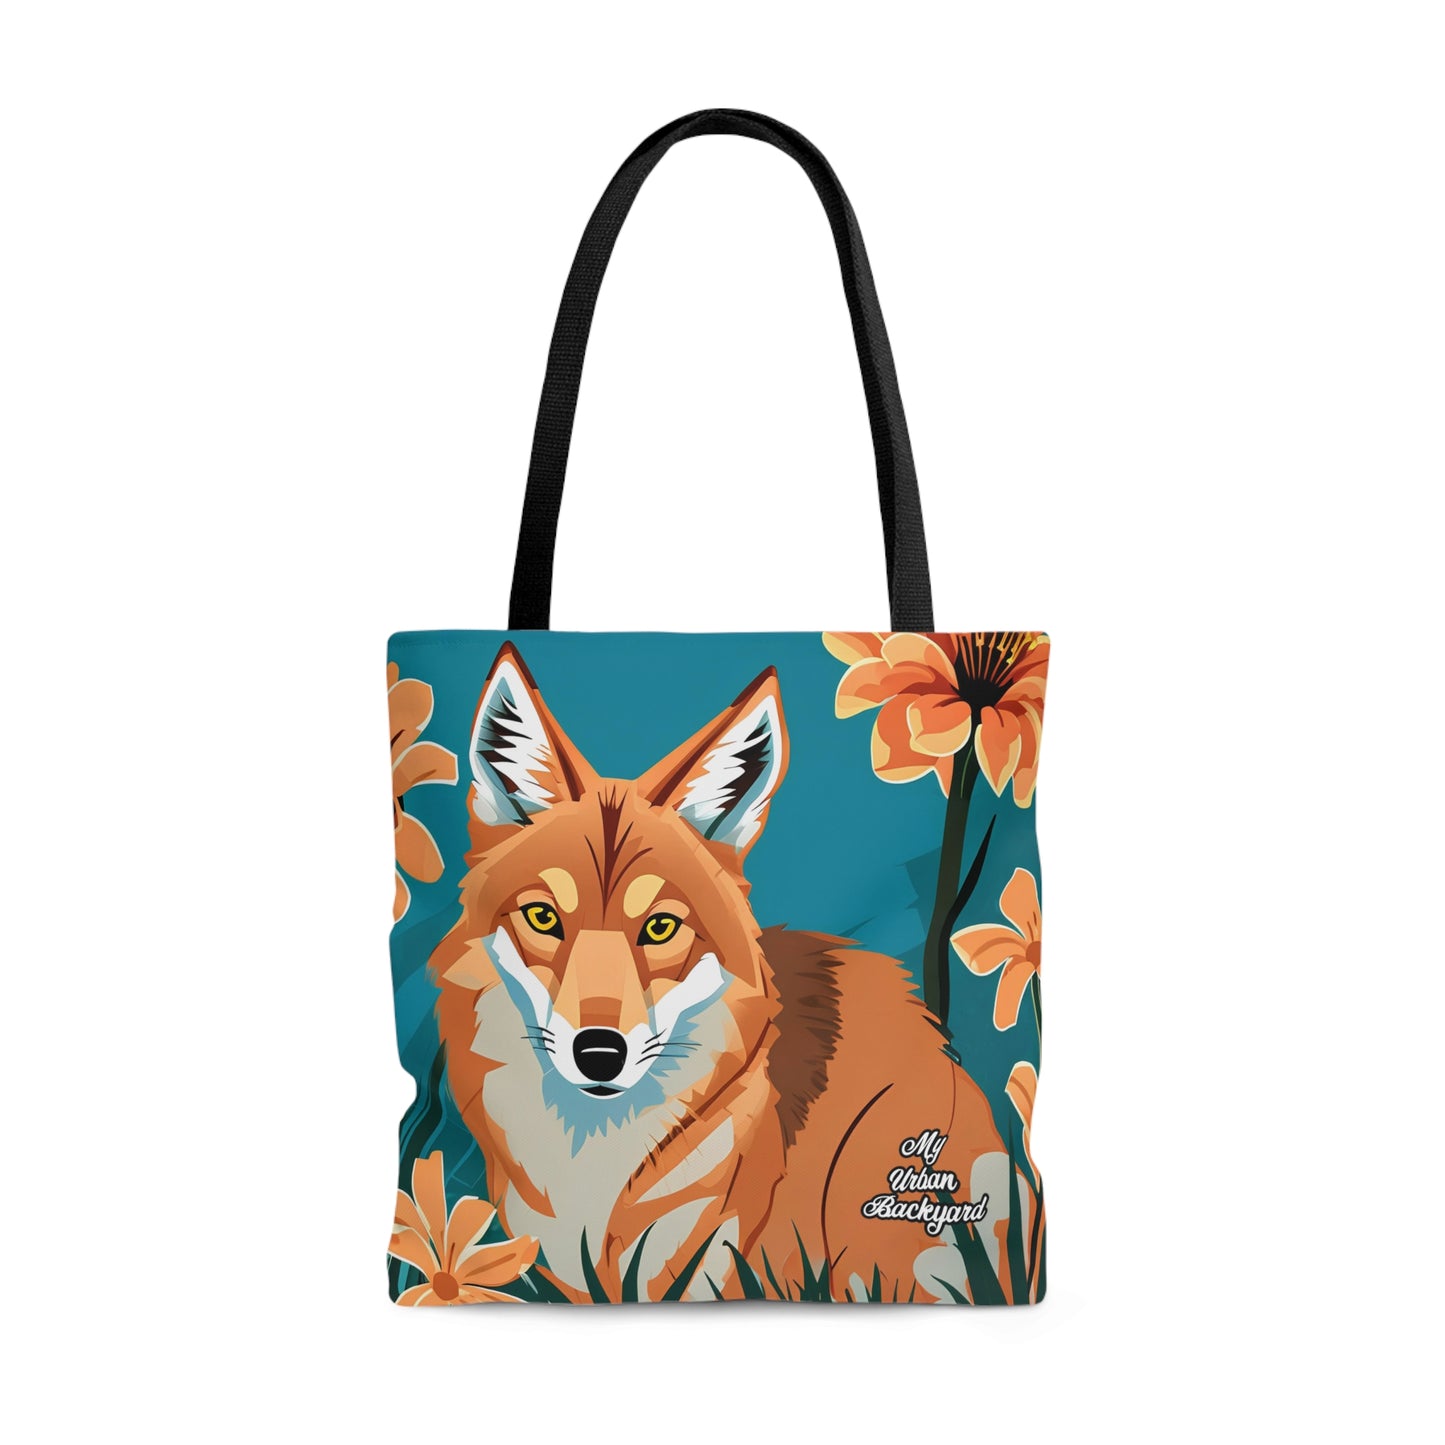 Coyote with Flowers, Tote Bag for Everyday Use - Durable and Functional